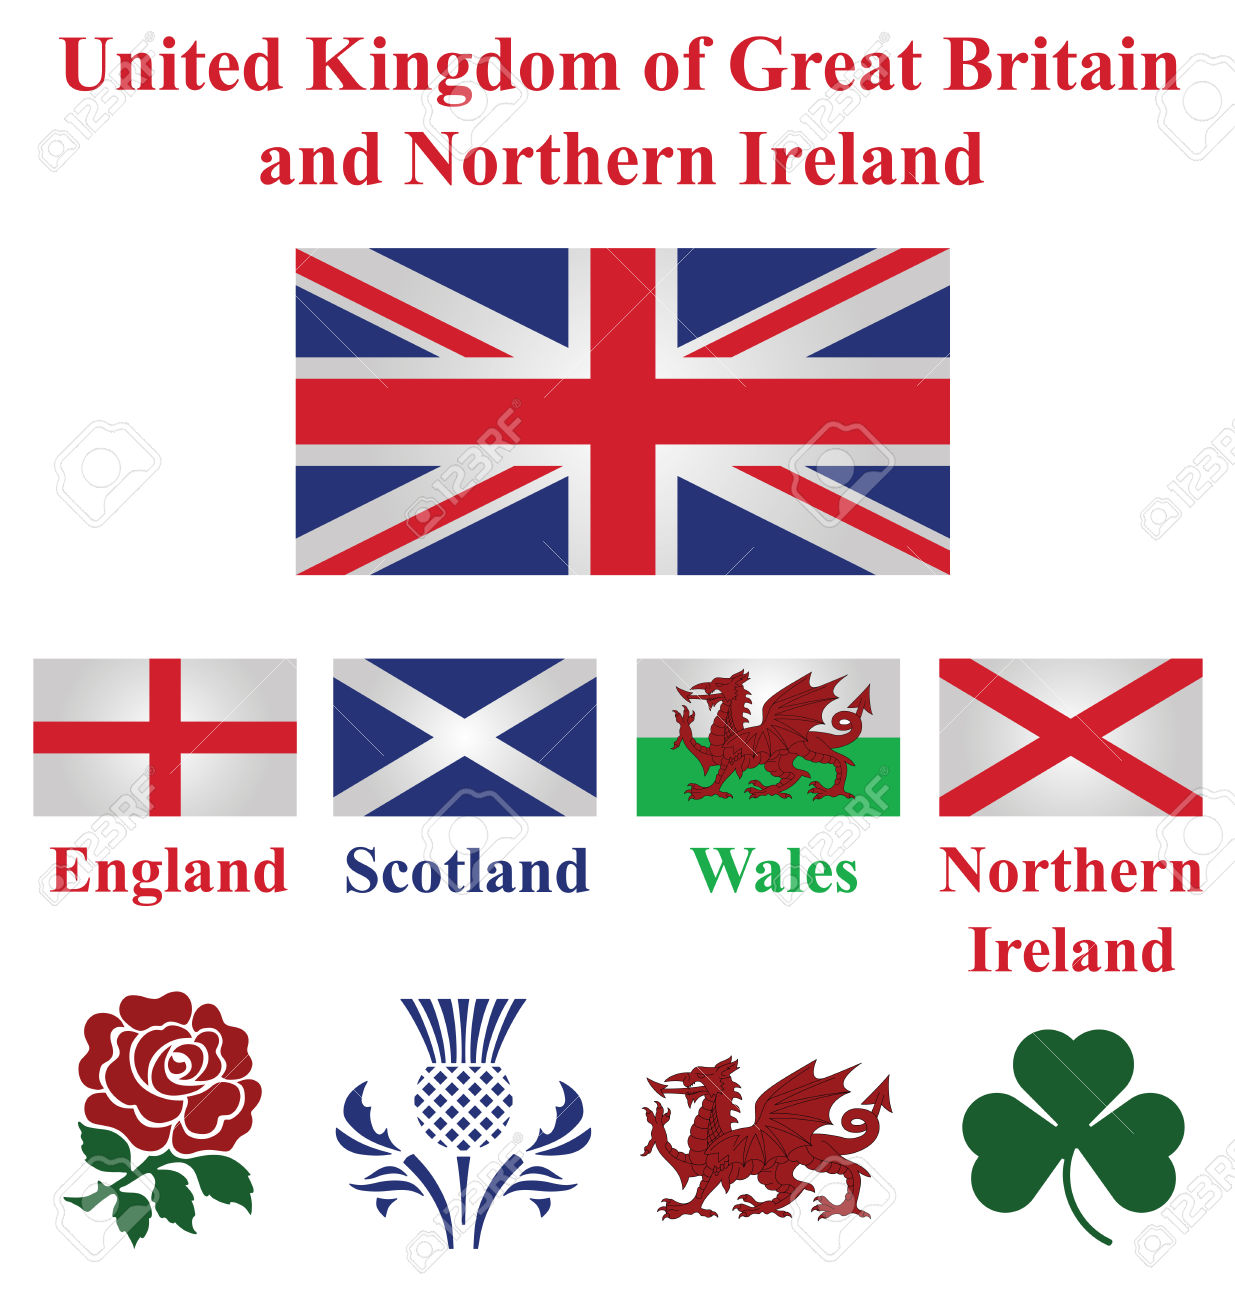 History Behind The Union Jack